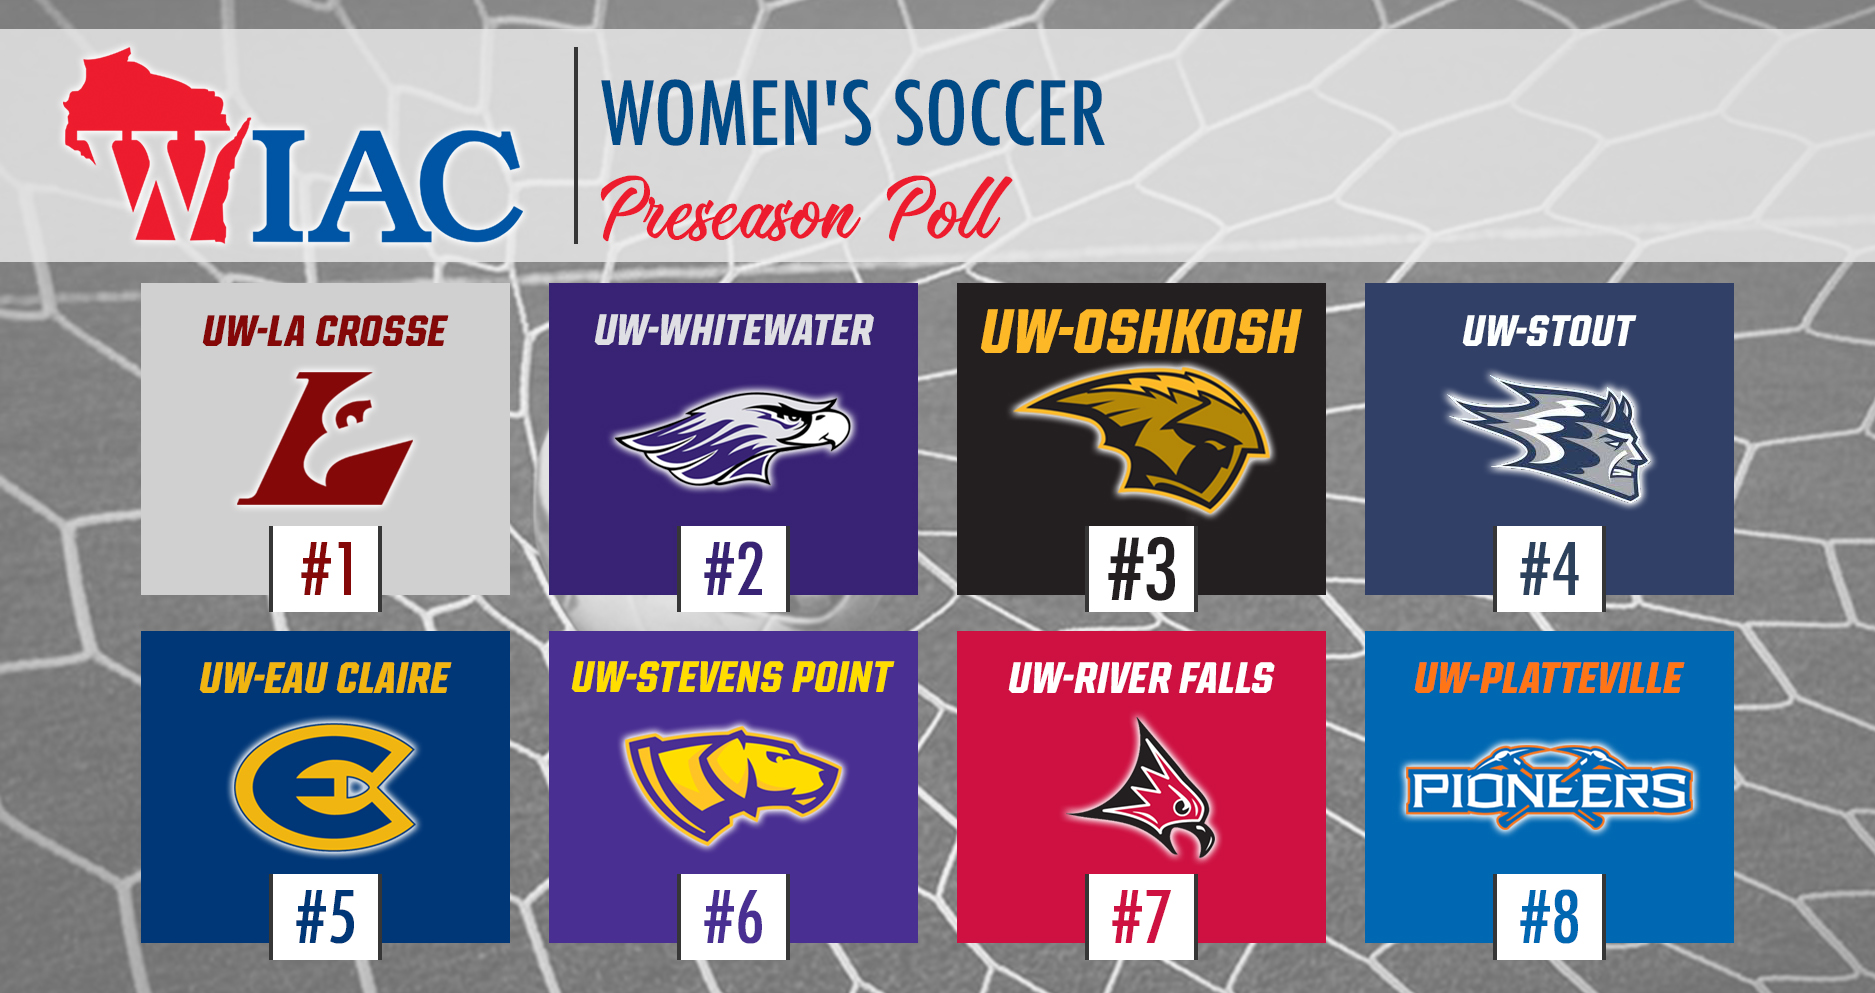 Titans Projected To Finish Third In WIAC Women’s Soccer Standings